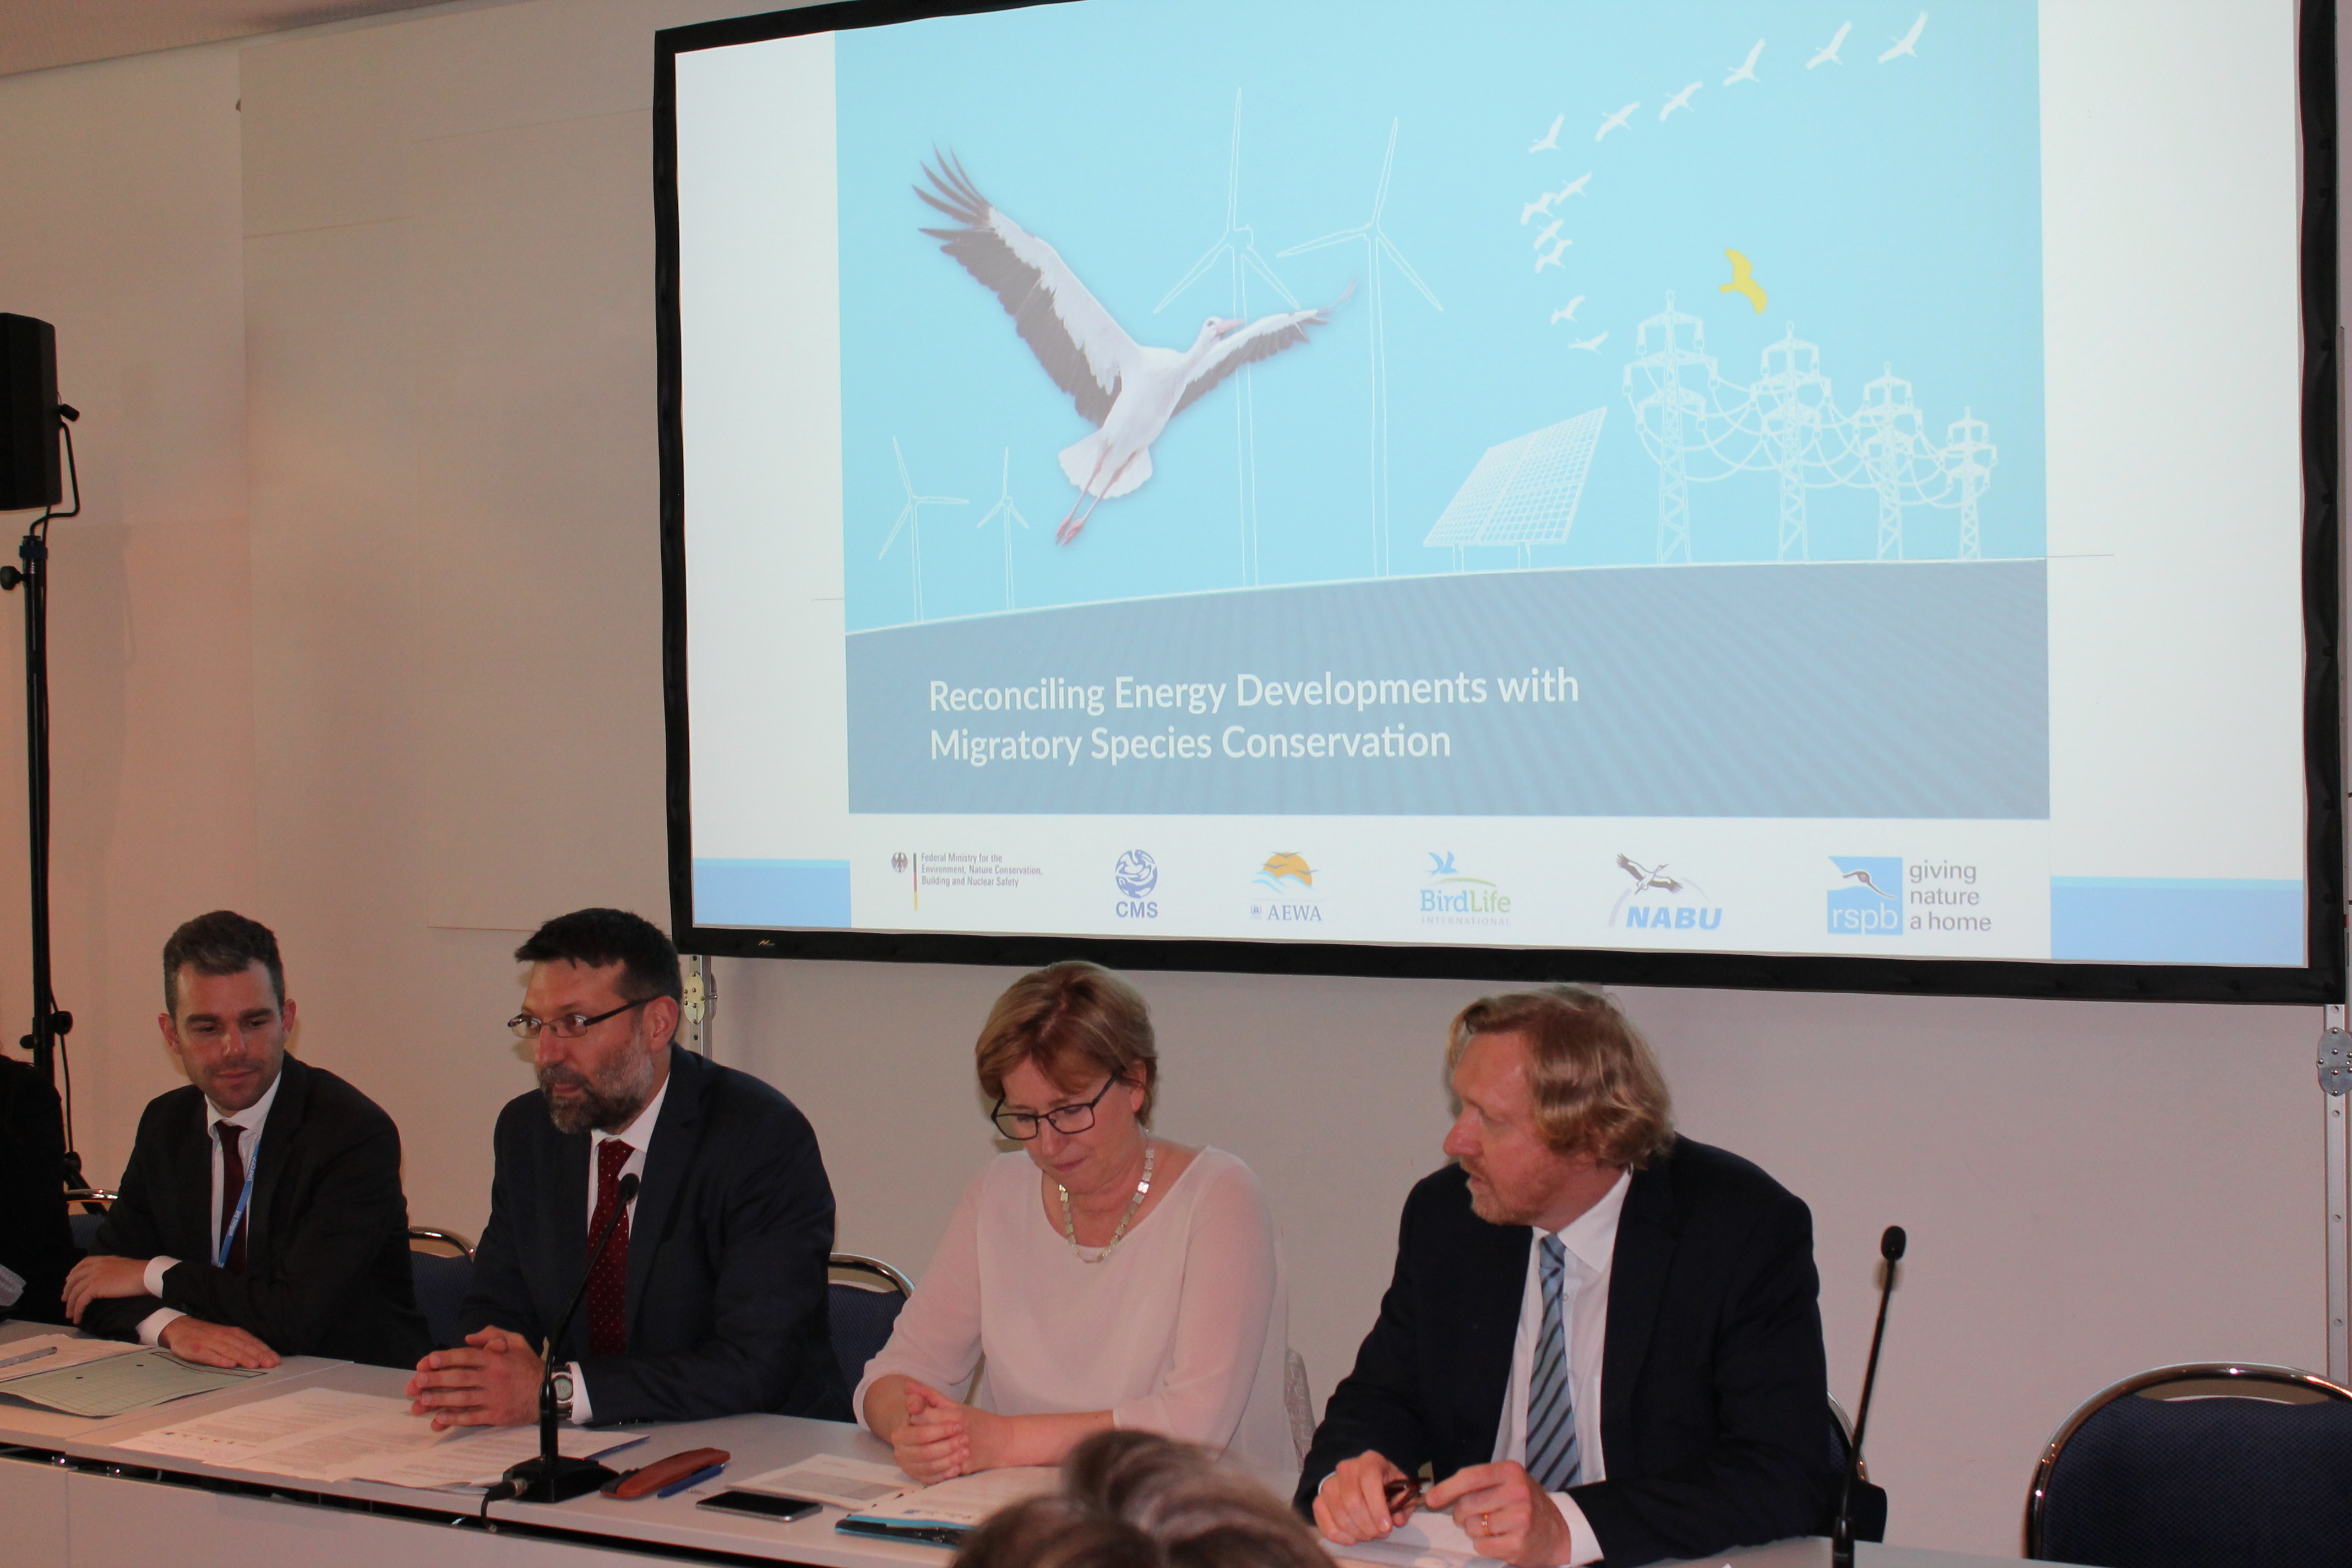 Panel members at Side Event "Reconciling Energy Developments with Migratory Species Conservation"